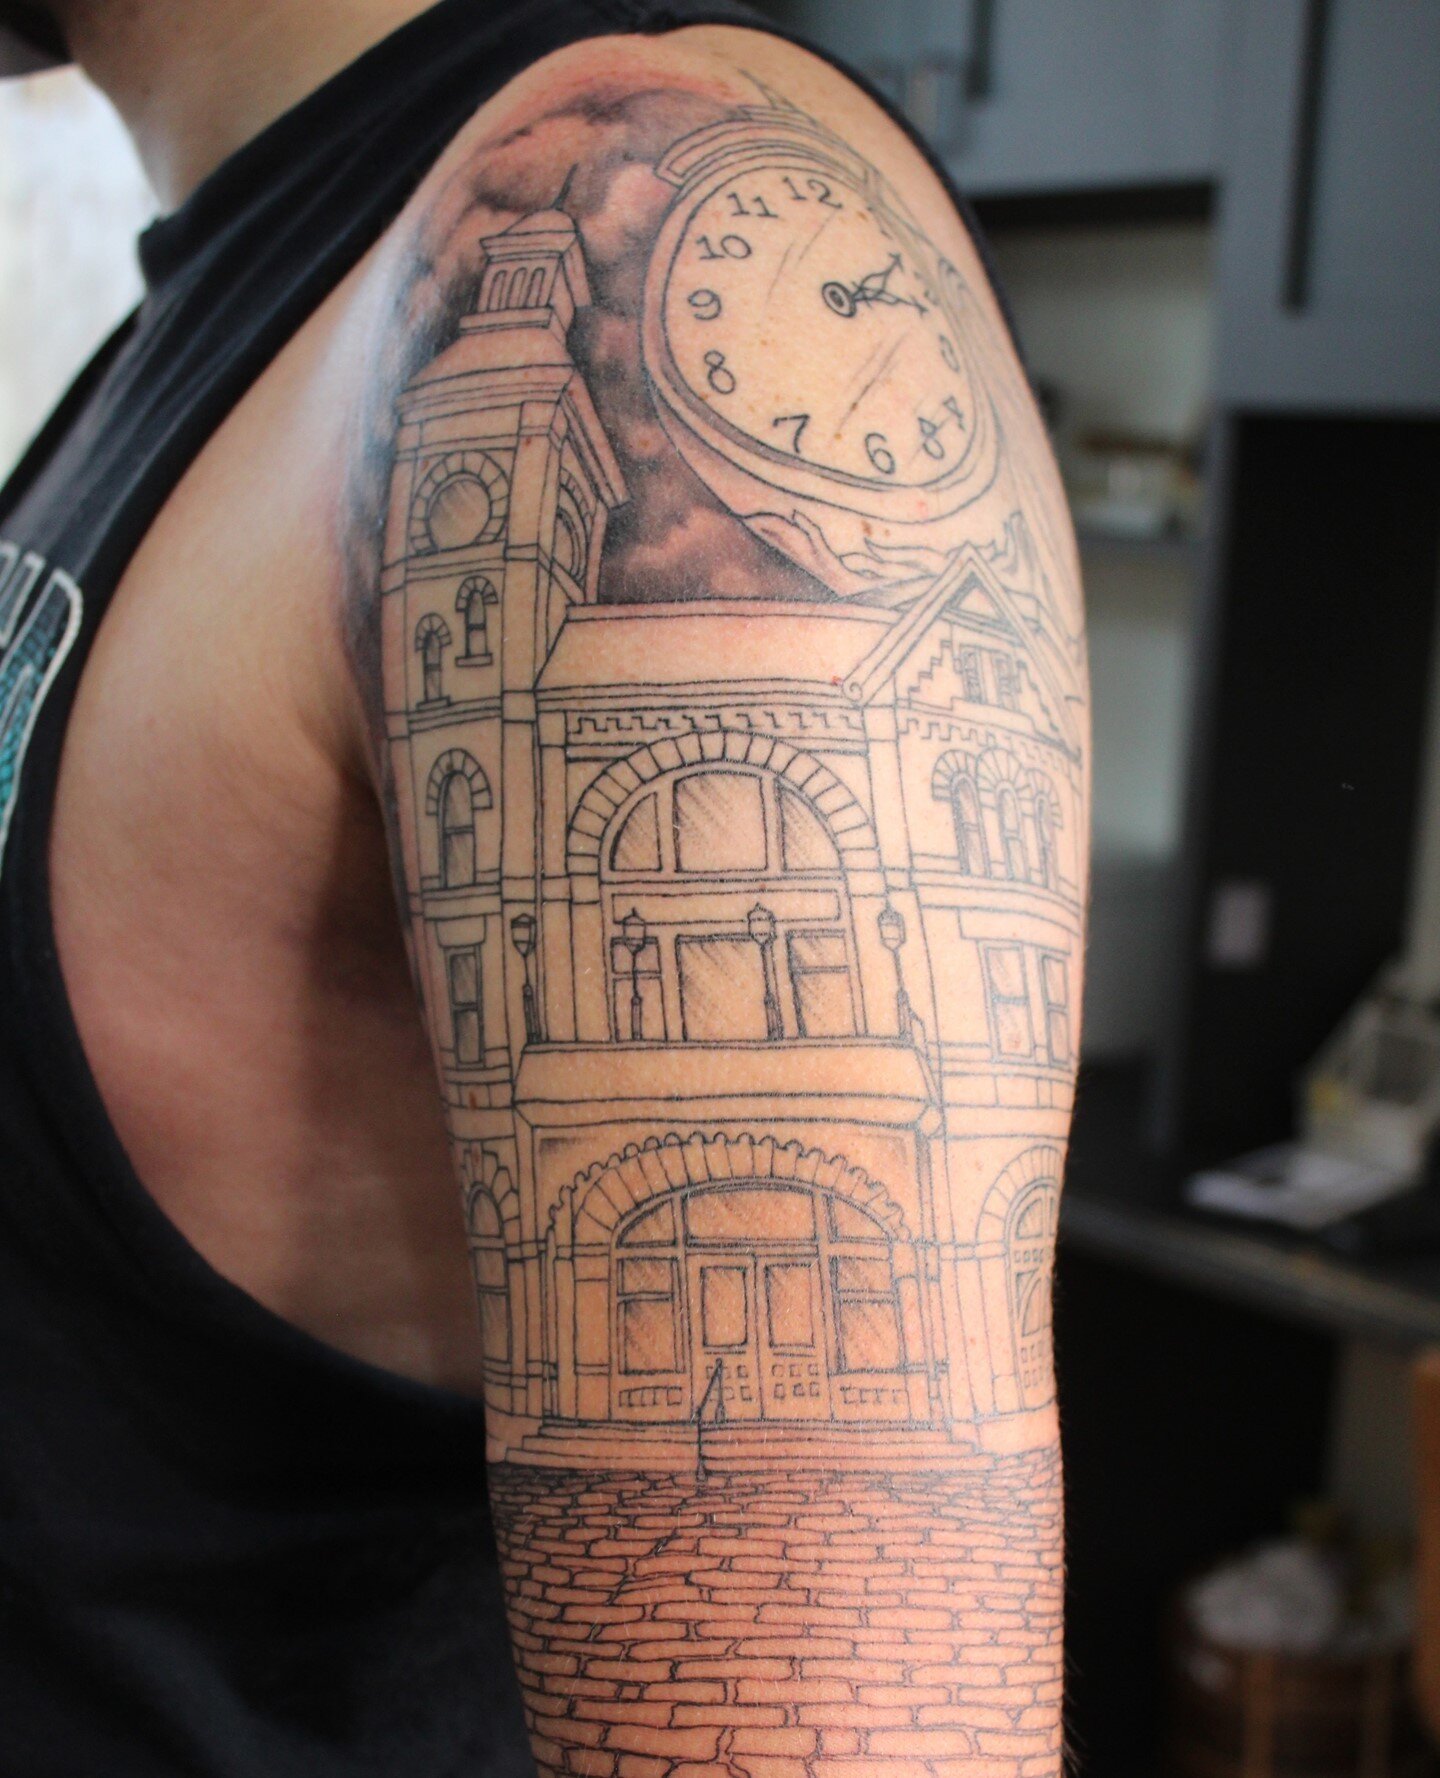 Getting a great start on this Woodstock sleeve. Thanks, Tristan!